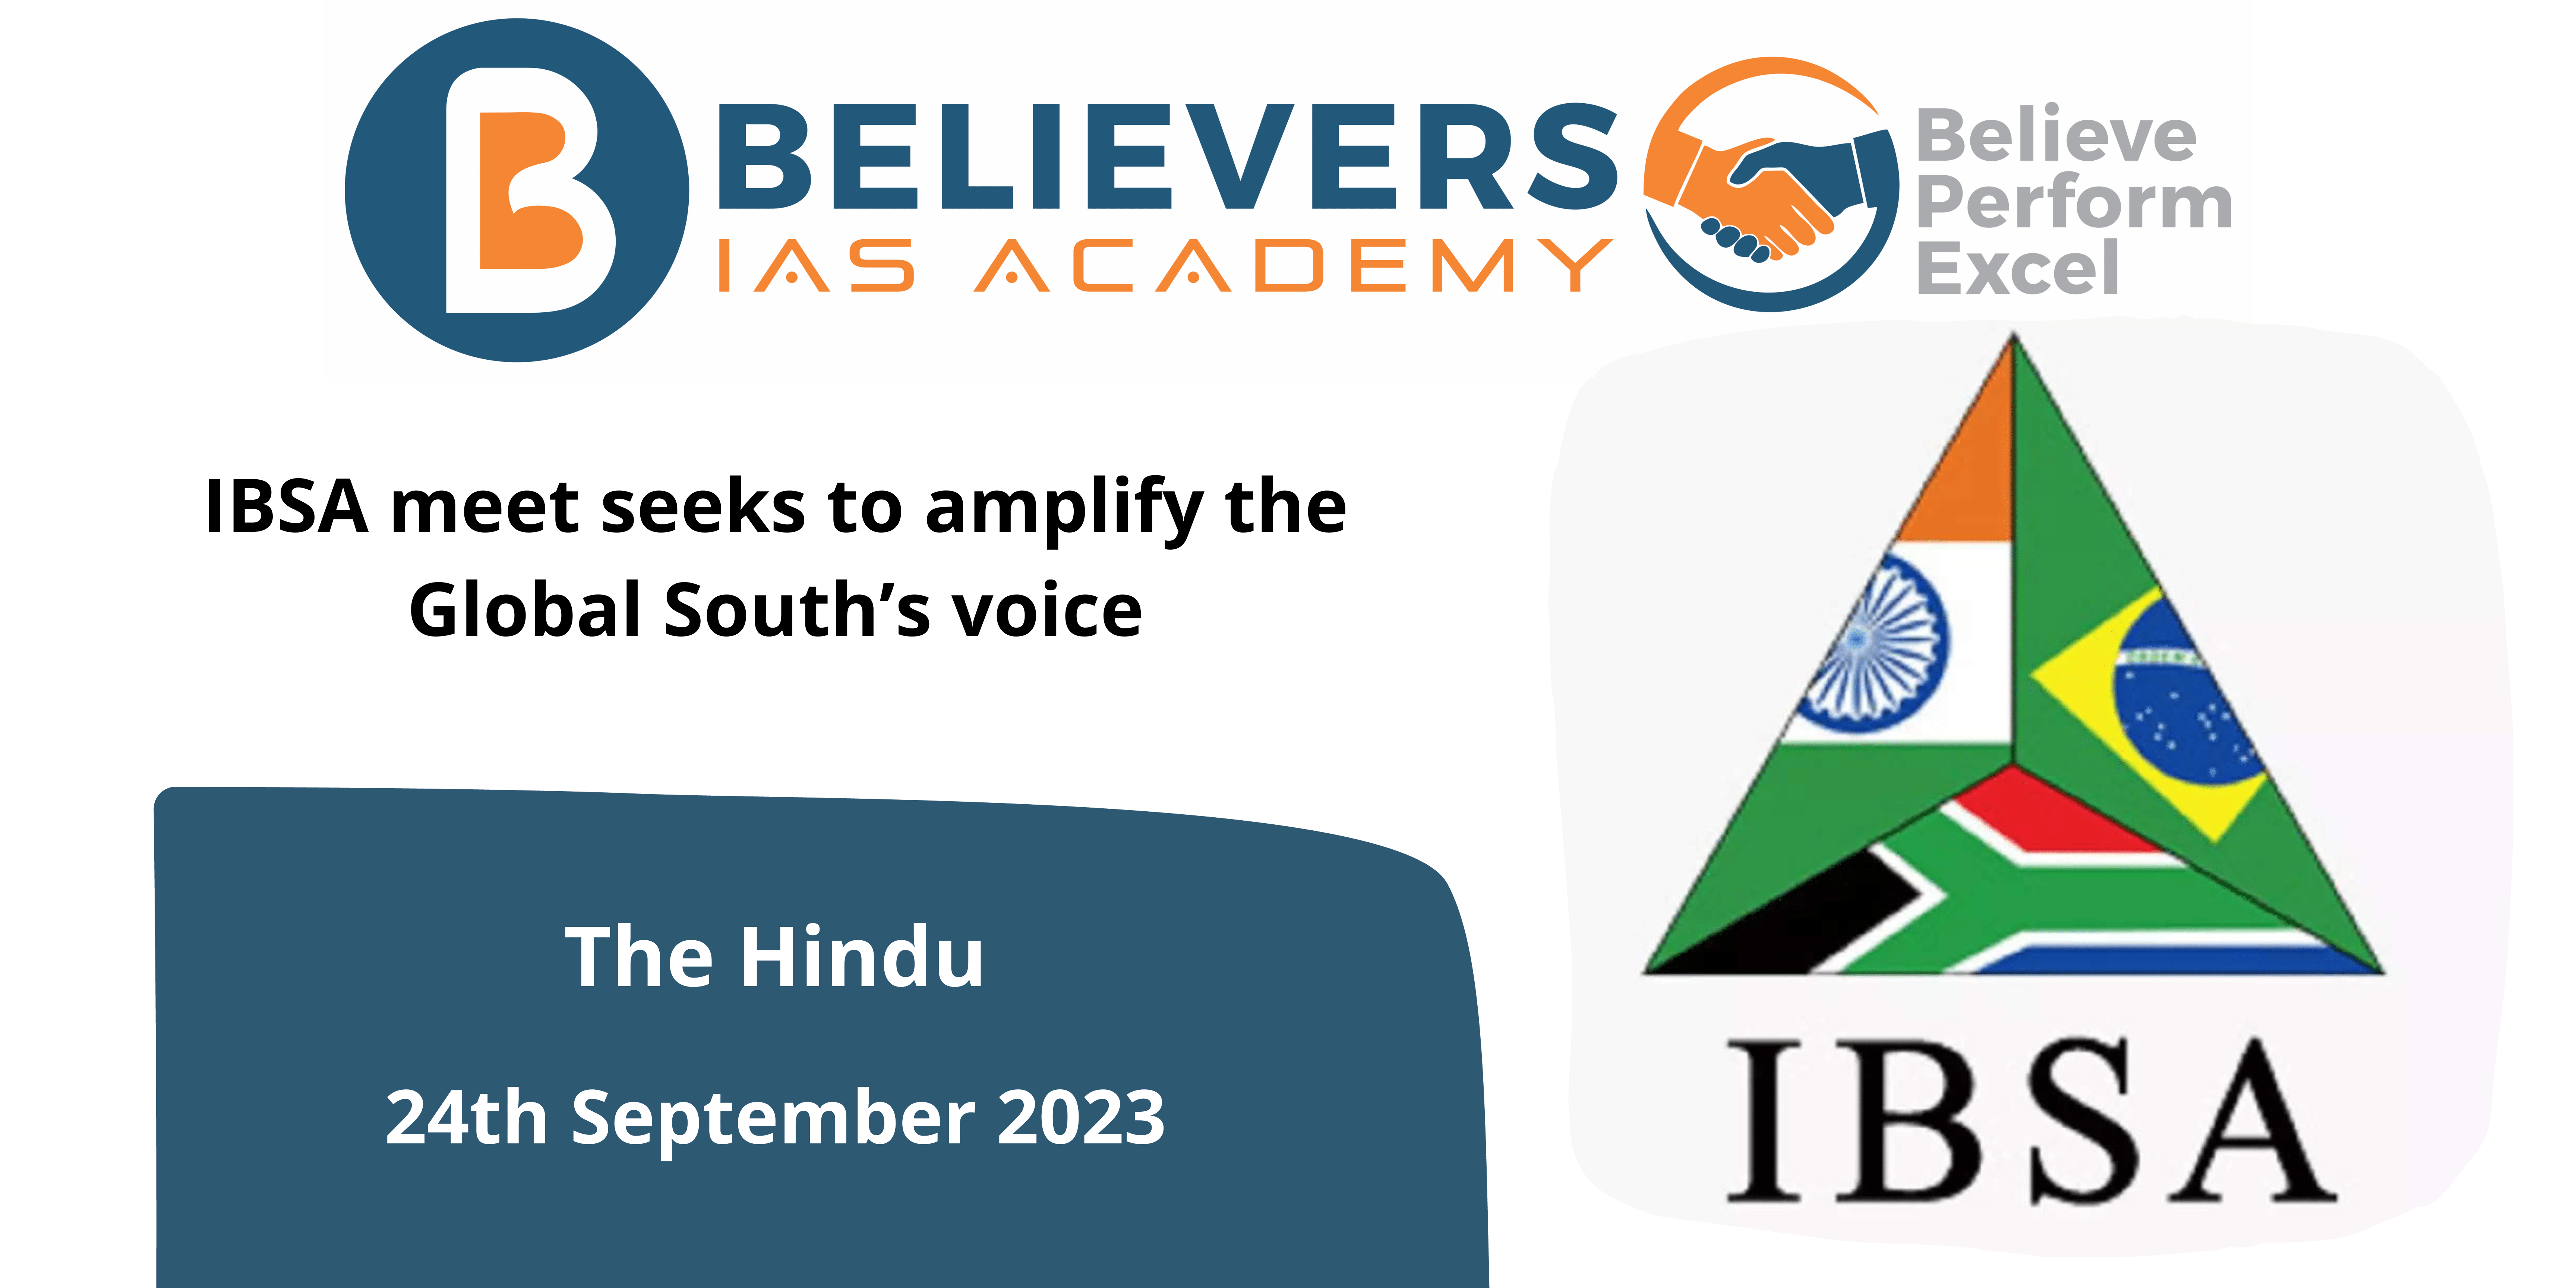 IBSA meet seeks to amplify the Global South’s voice